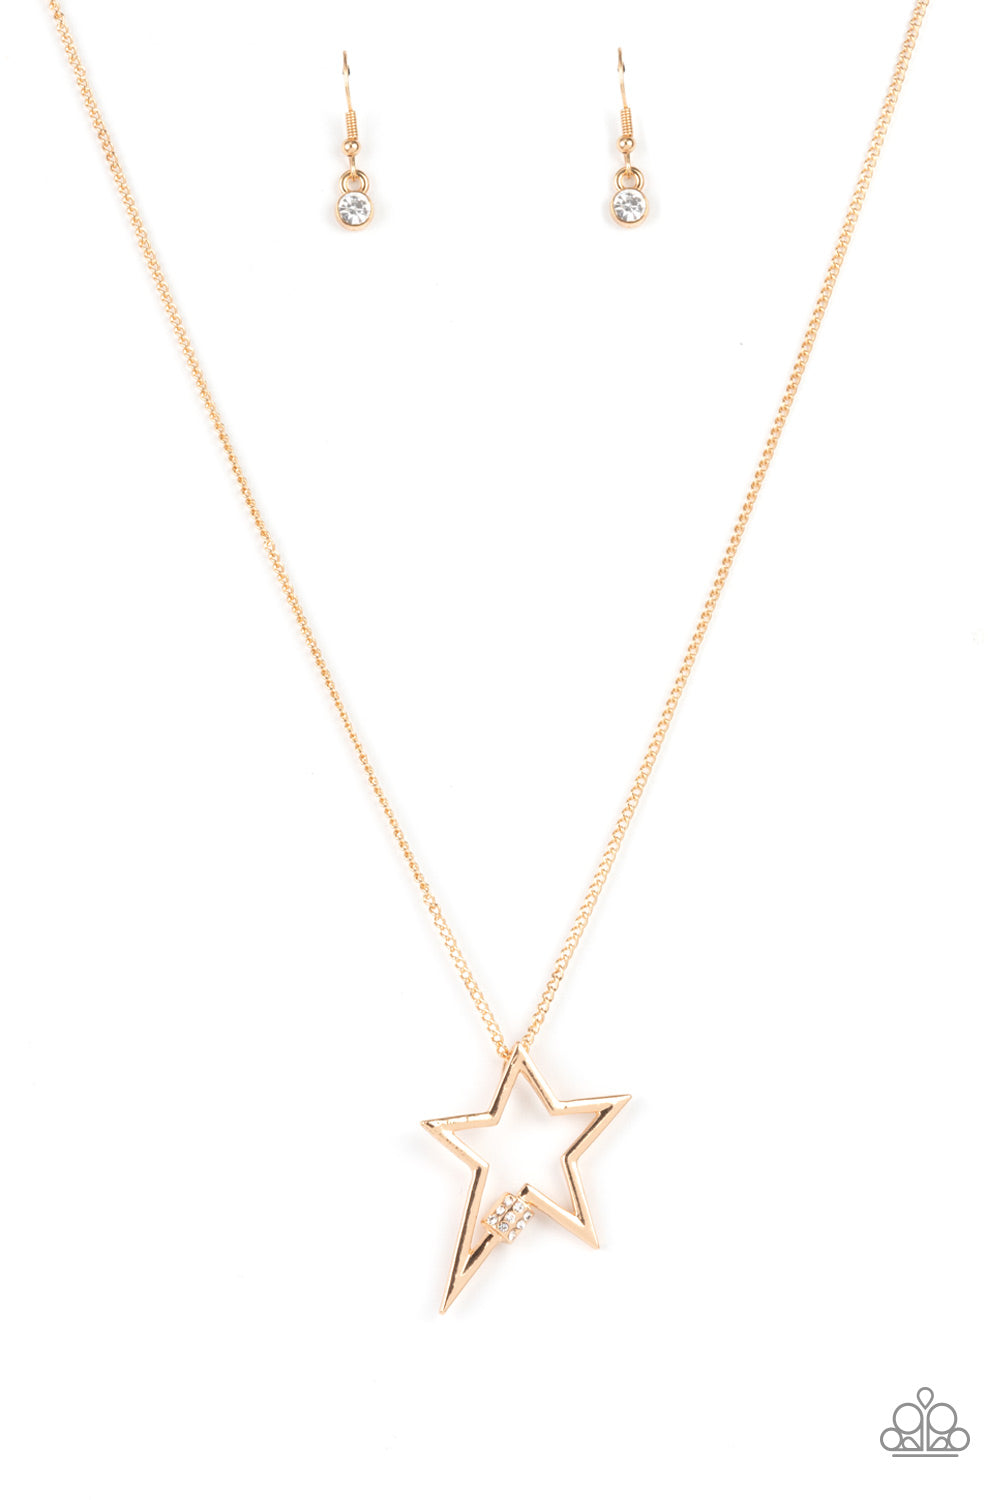 Paparazzi Accessories - Light Up The Sky #N700 - Gold Necklace